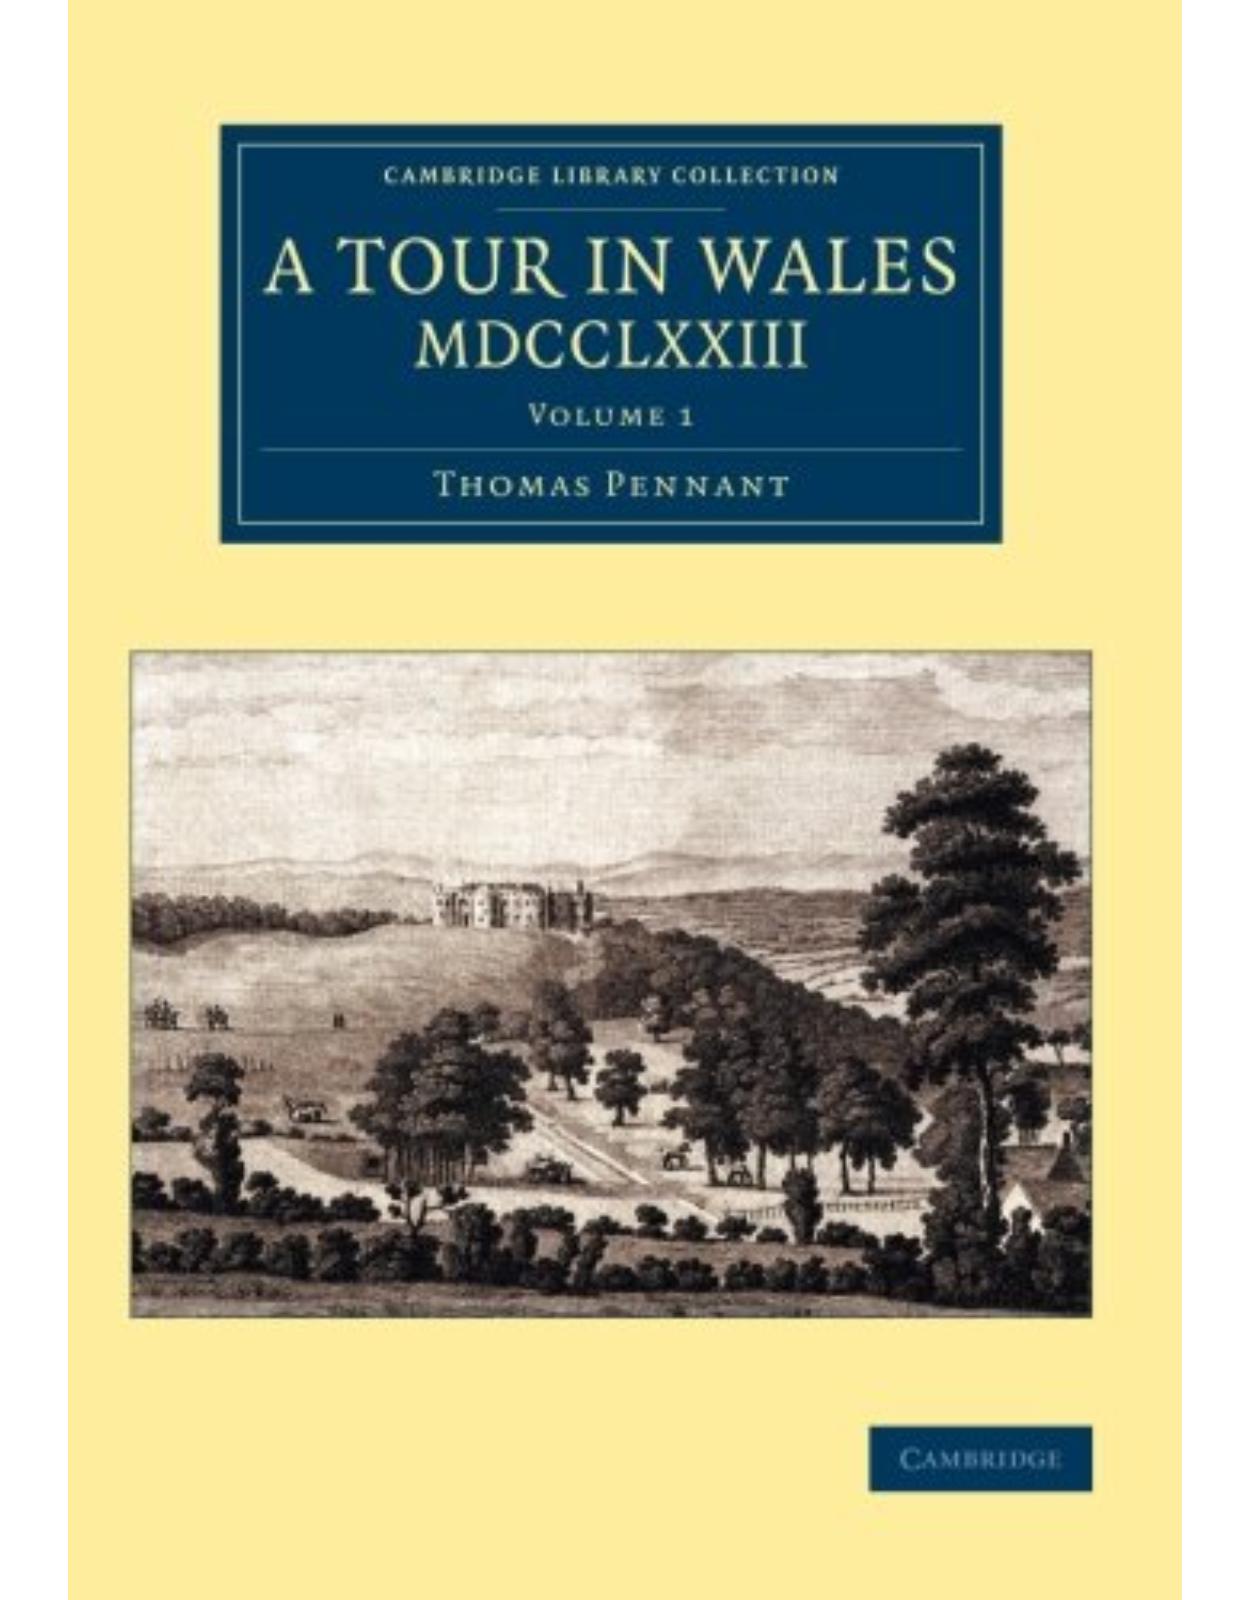 A Tour in Wales, MDCCLXXIII: Volume 1 (Cambridge Library Collection - British & Irish History, 17th & 18th Centuries)